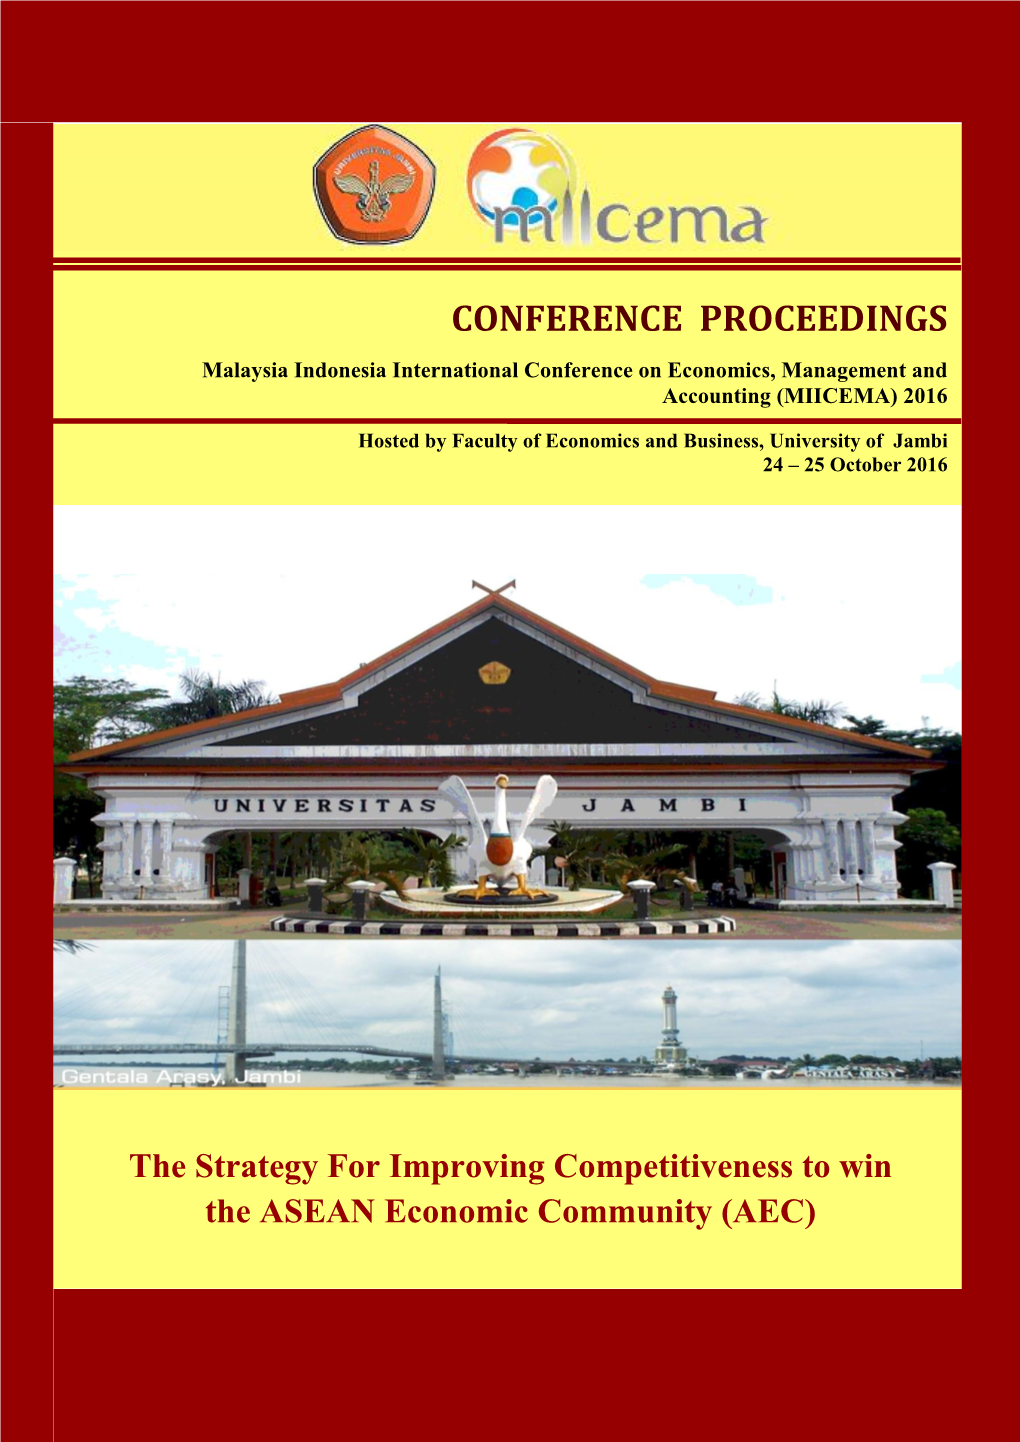 CONFERENCE PROCEEDINGS Malaysia Indonesia International Conference on Economics, Management and Accounting (MIICEMA) 2016